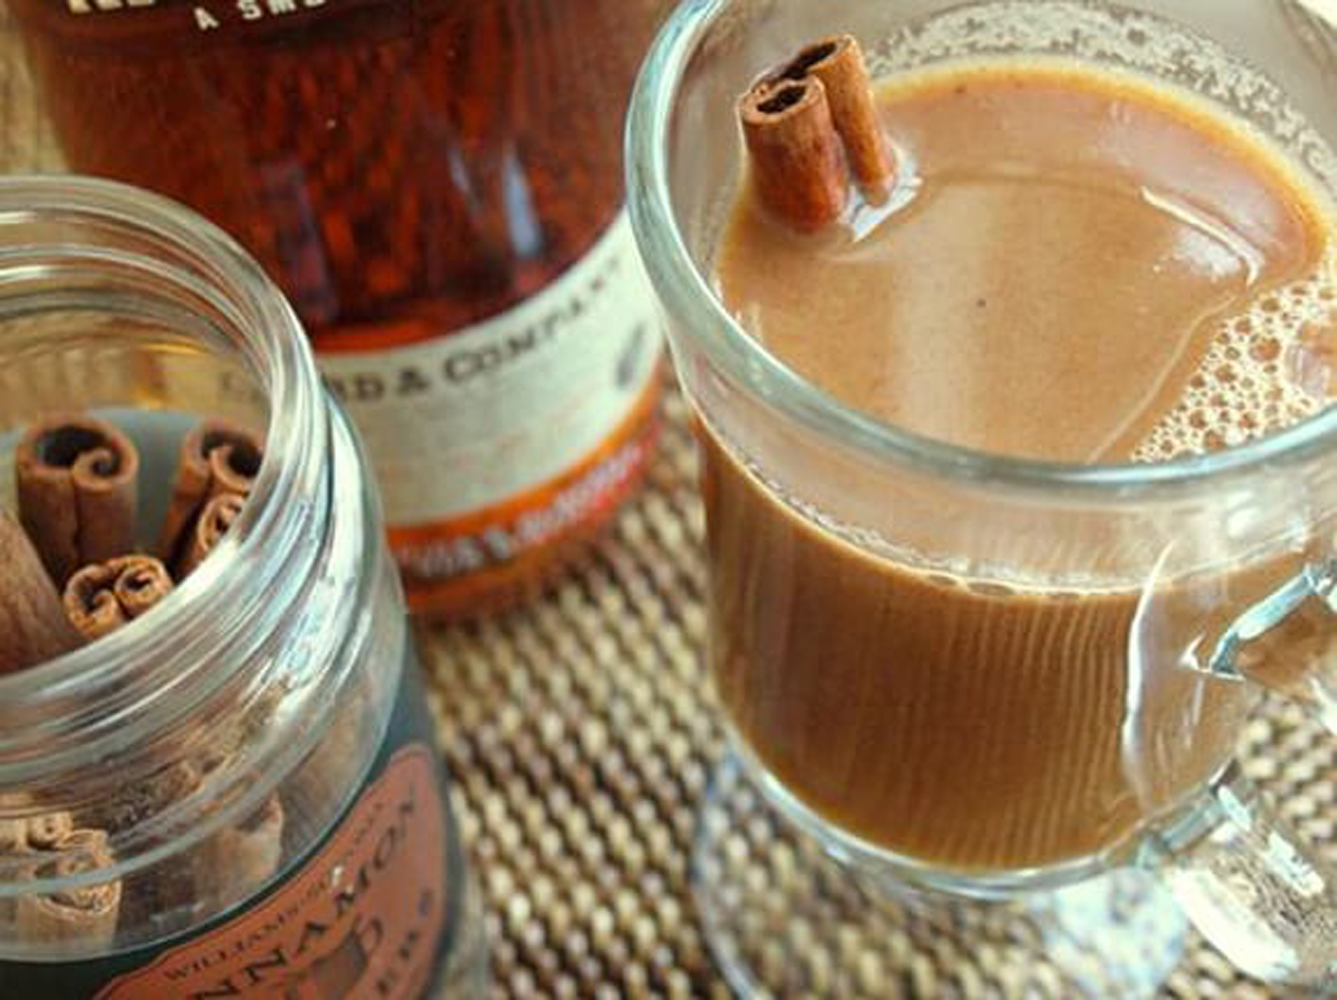 https://www.onceuponachef.com/images/2009/10/Hot-Buttered-Cider-with-Rum-1.jpg